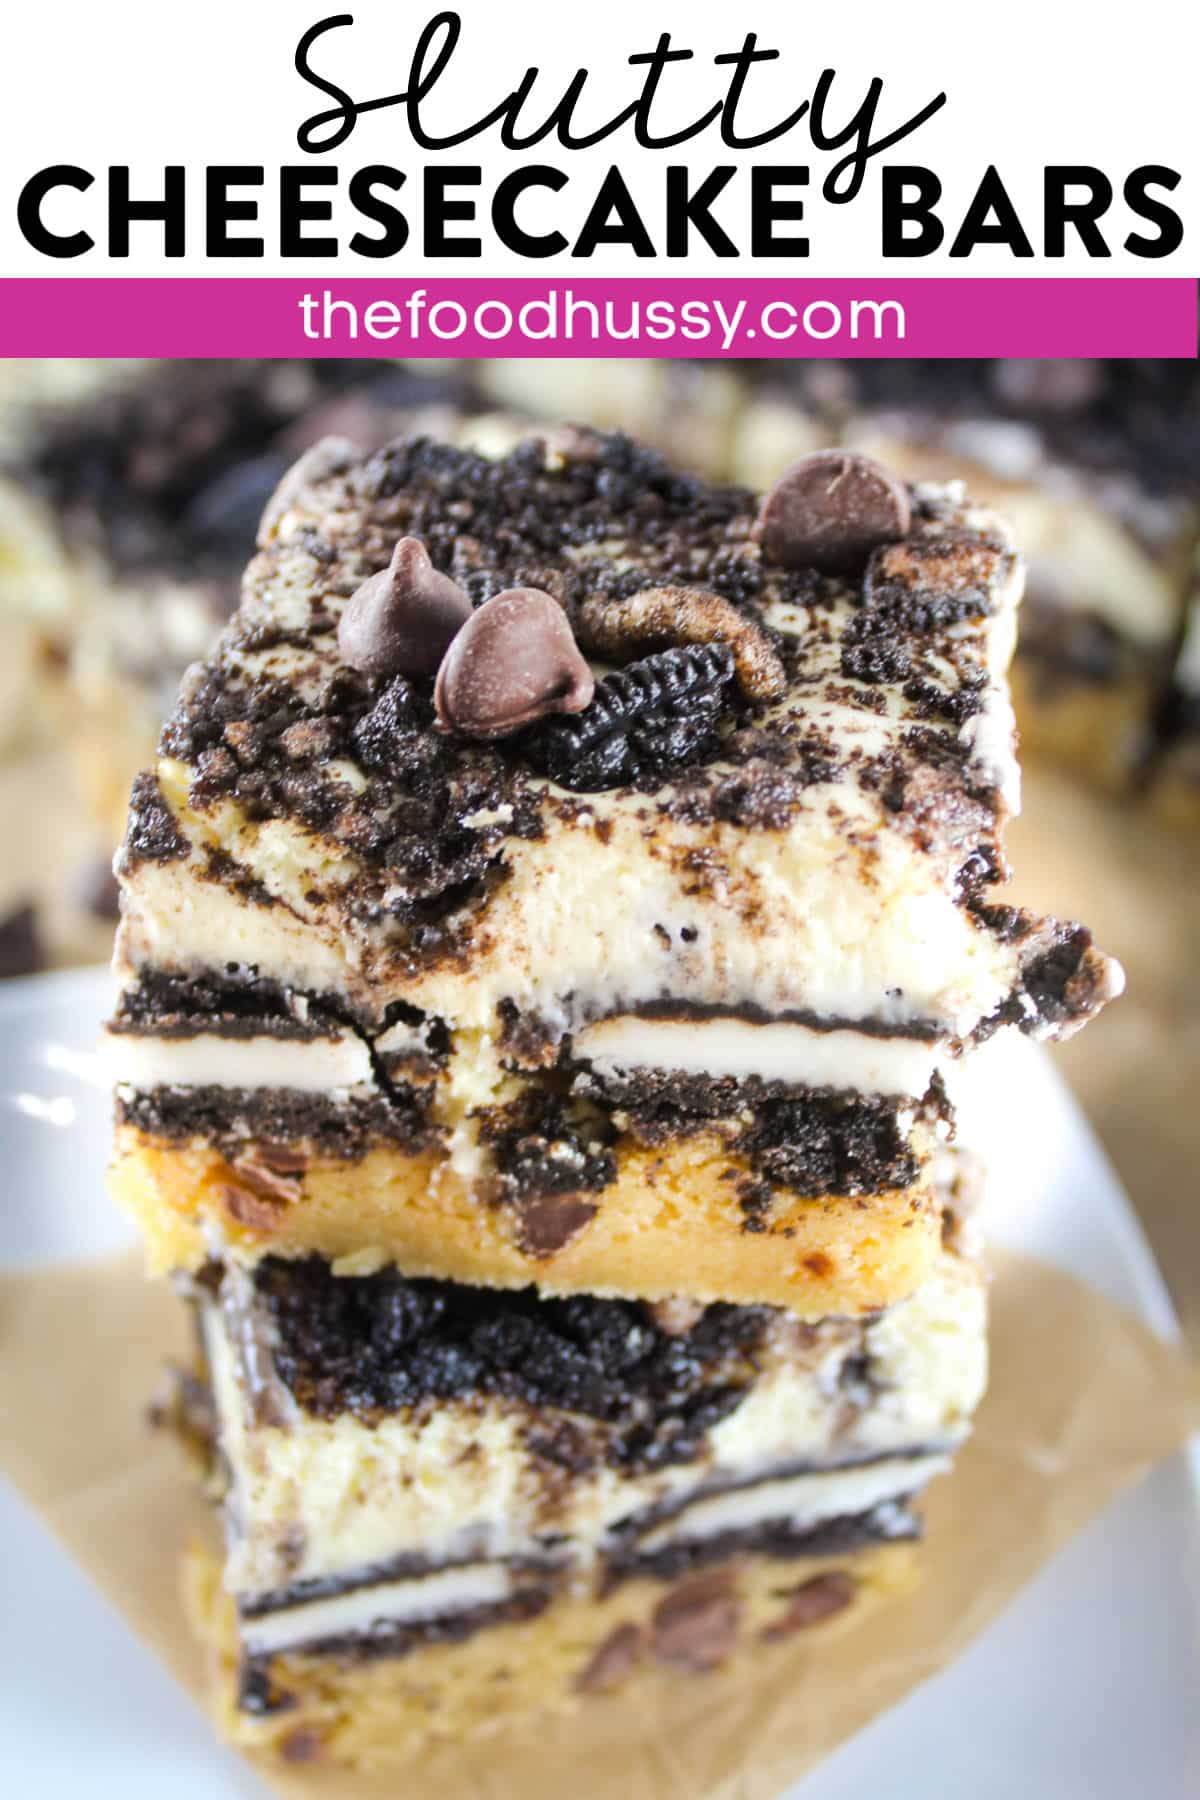 These Slutty Cheesecake Bars will have you thinking THOUGHTS about cheesecake! A homemade chocolate chip cookie bottom topped with Double Stuff Oreos and then topped with a light and creamy cheesecake. These bars are WOW!  via @foodhussy